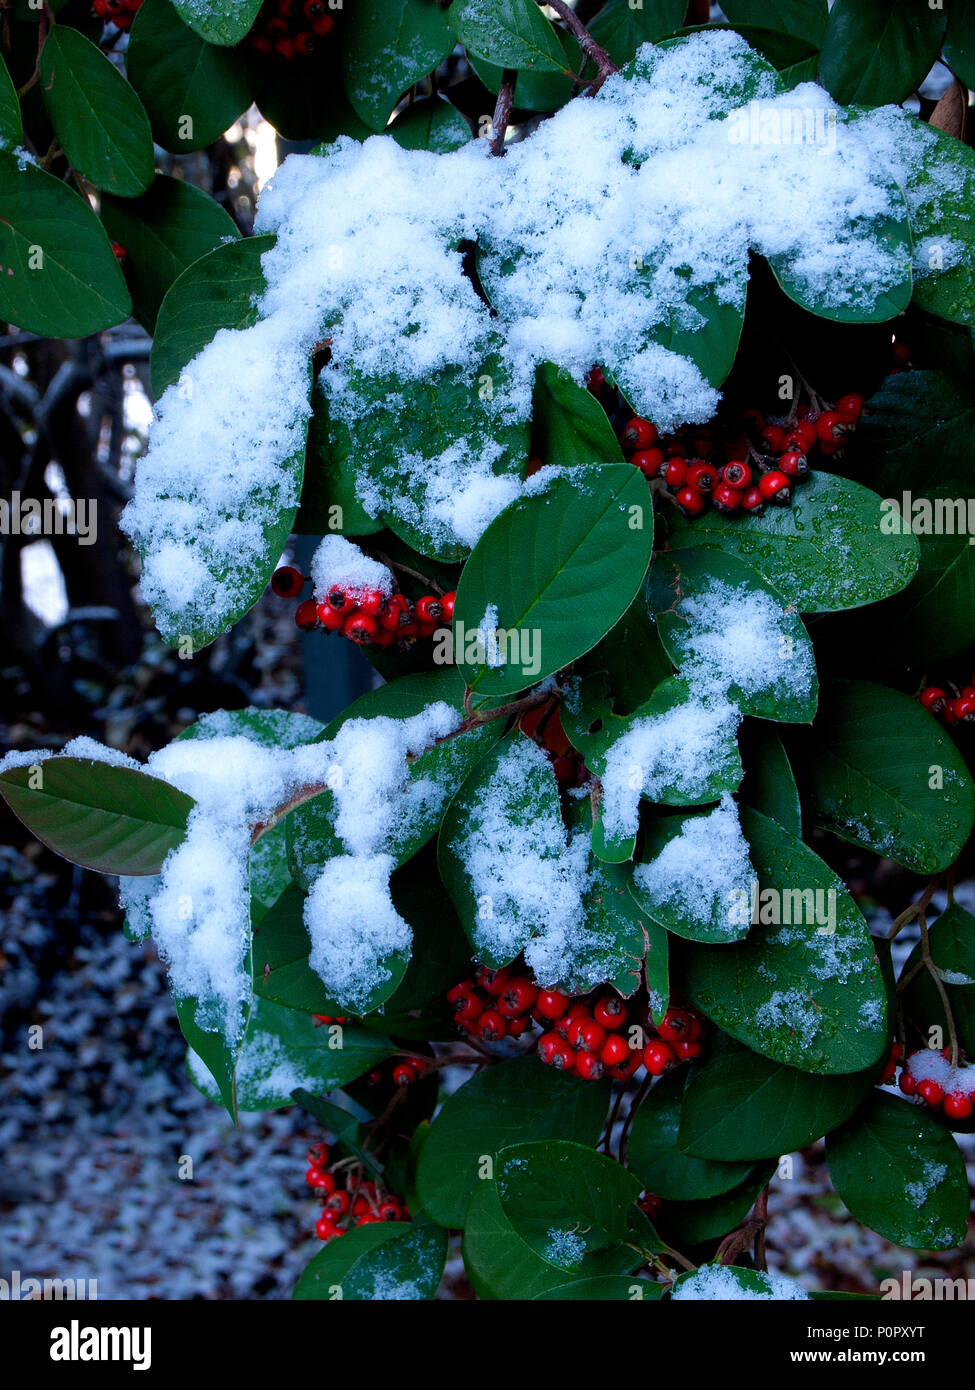 Snow on leaves and red berries Stock Photo